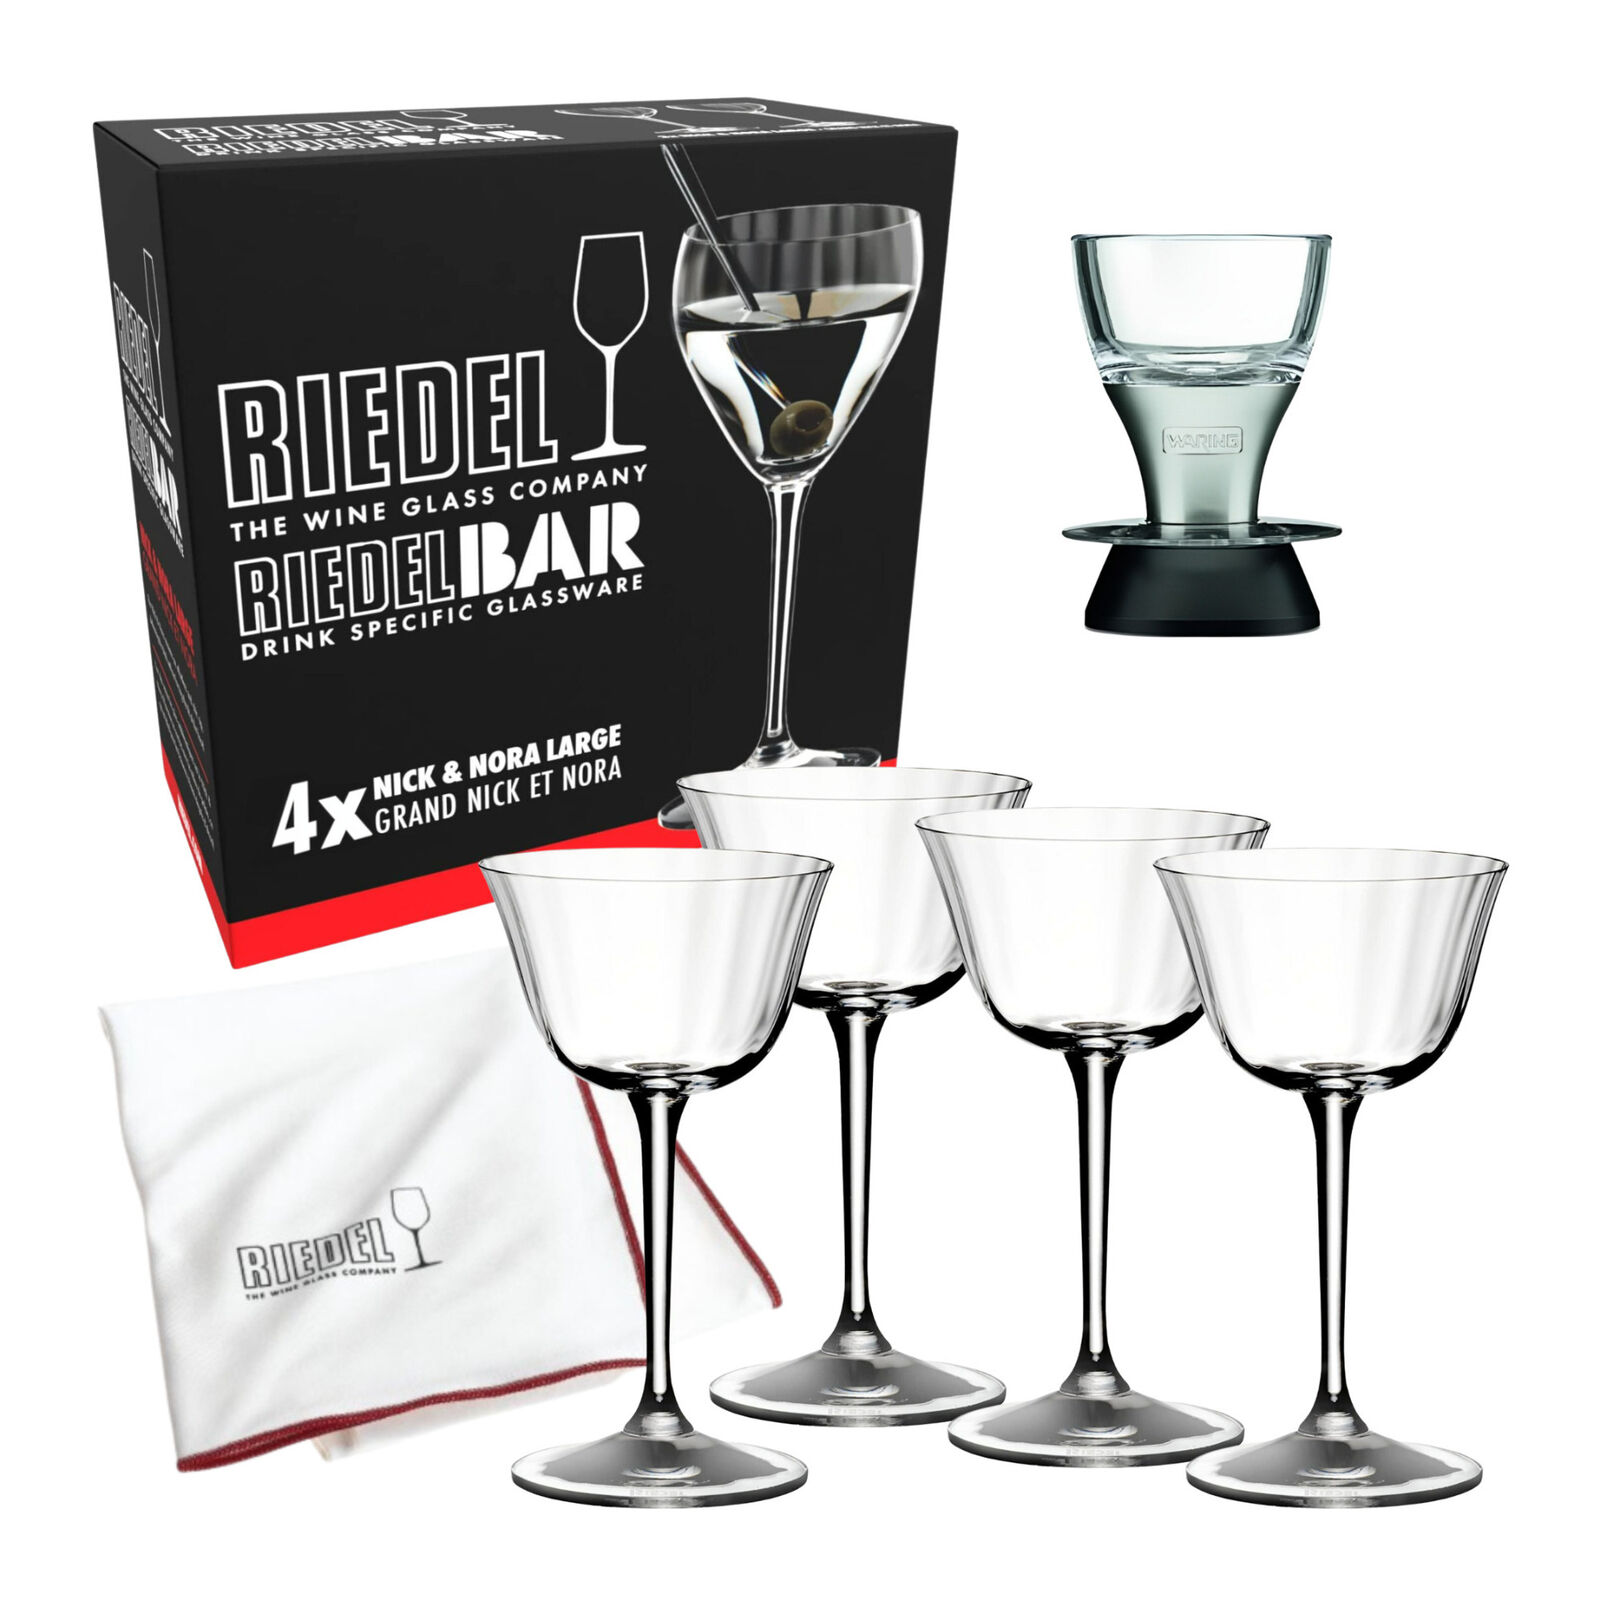 Riedel Specific Sour Optic Glassware 4-Pack with Polishing Cloth Bundle